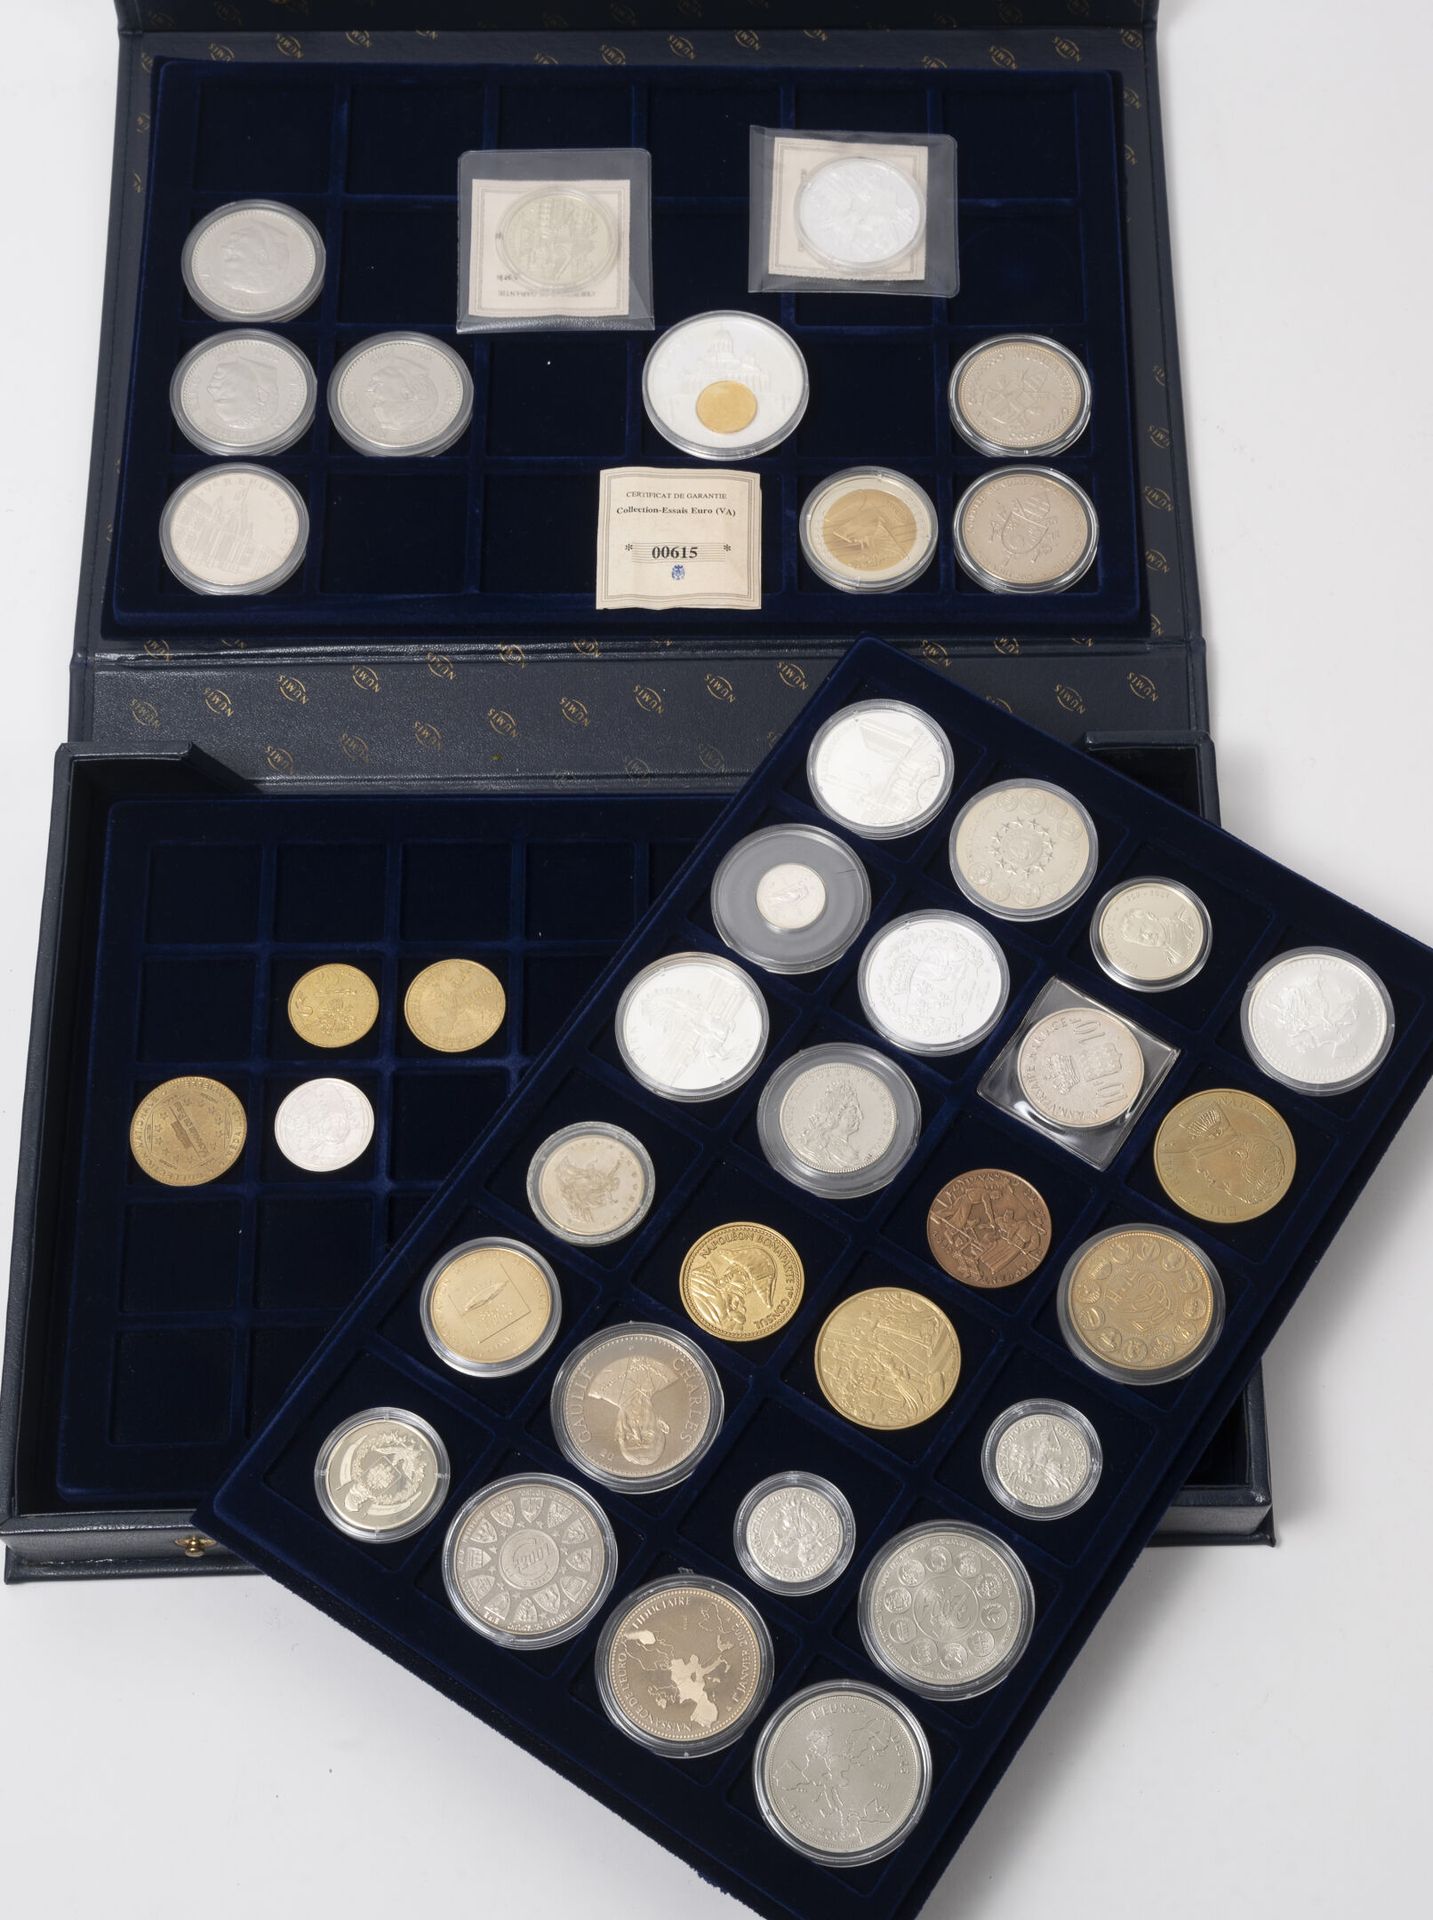 Null Lot of coins and medals including:

-5 plates including 35 coins.

-2 folde&hellip;